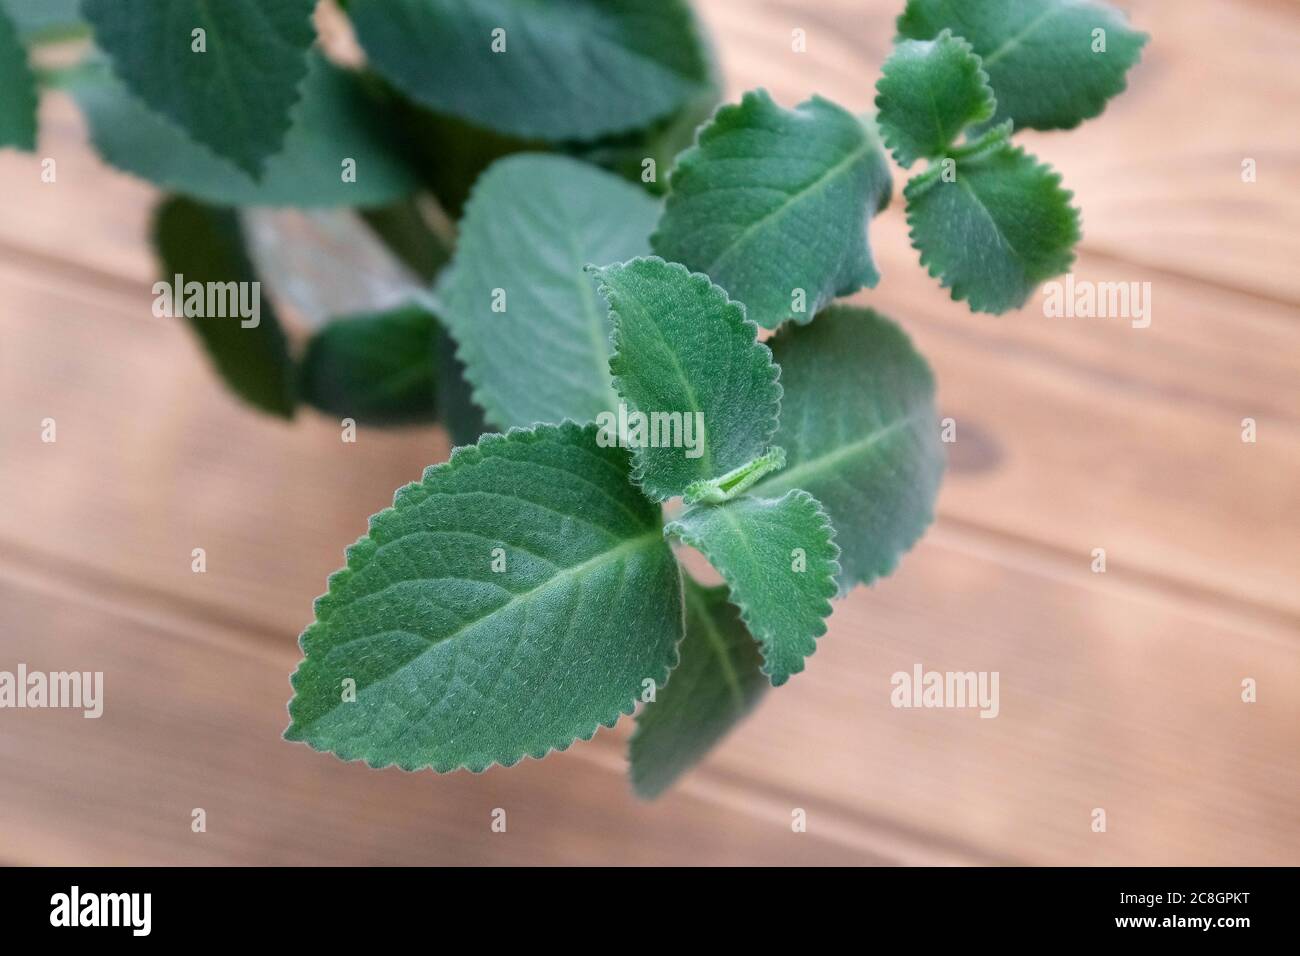 Indoor mint on a tree. Blurred background. Stock Photo